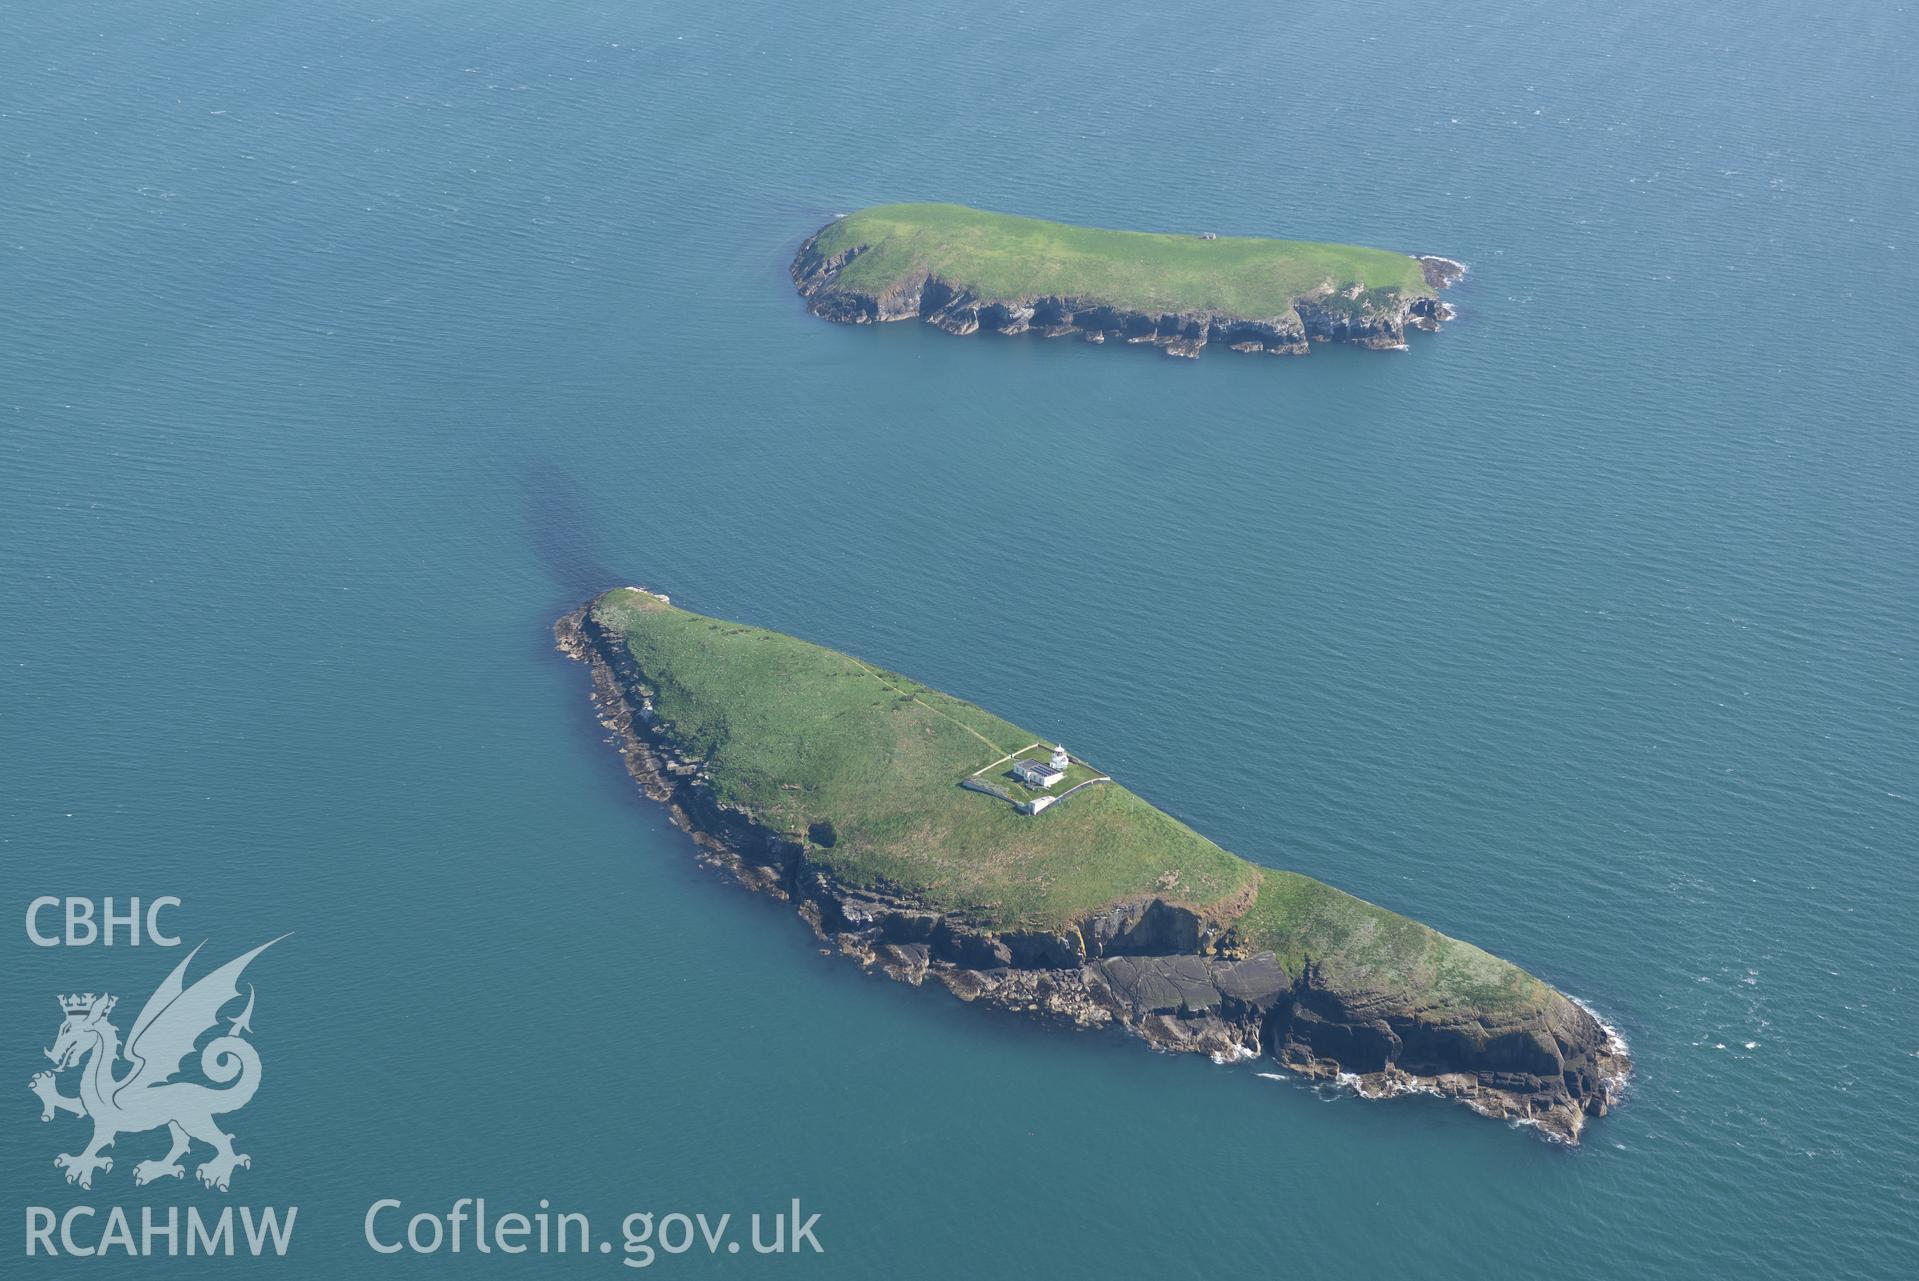 Aerial photography of The Tudwal's Islands taken on 3rd May 2017.  Baseline aerial reconnaissance survey for the CHERISH Project. ? Crown: CHERISH PROJECT 2017. Produced with EU funds through the Ireland Wales Co-operation Programme 2014-2020. All material made freely available through the Open Government Licence.